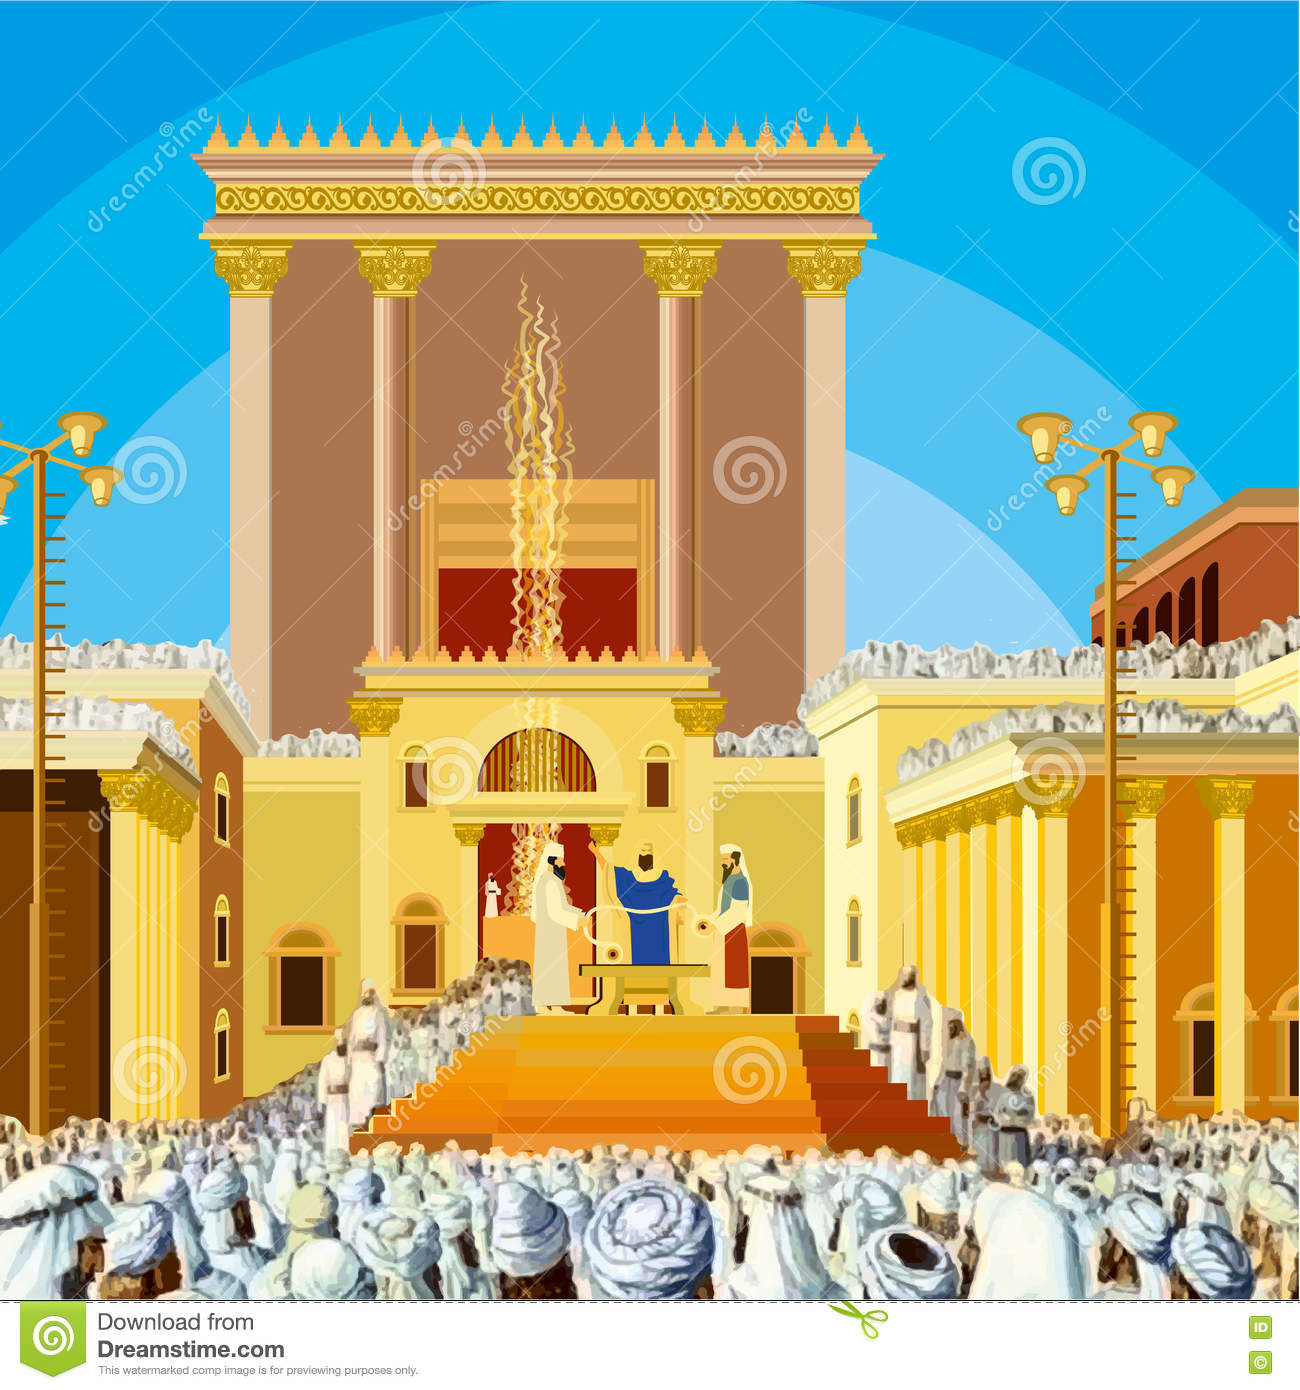 jerusalem and the lost temple of the jews free download